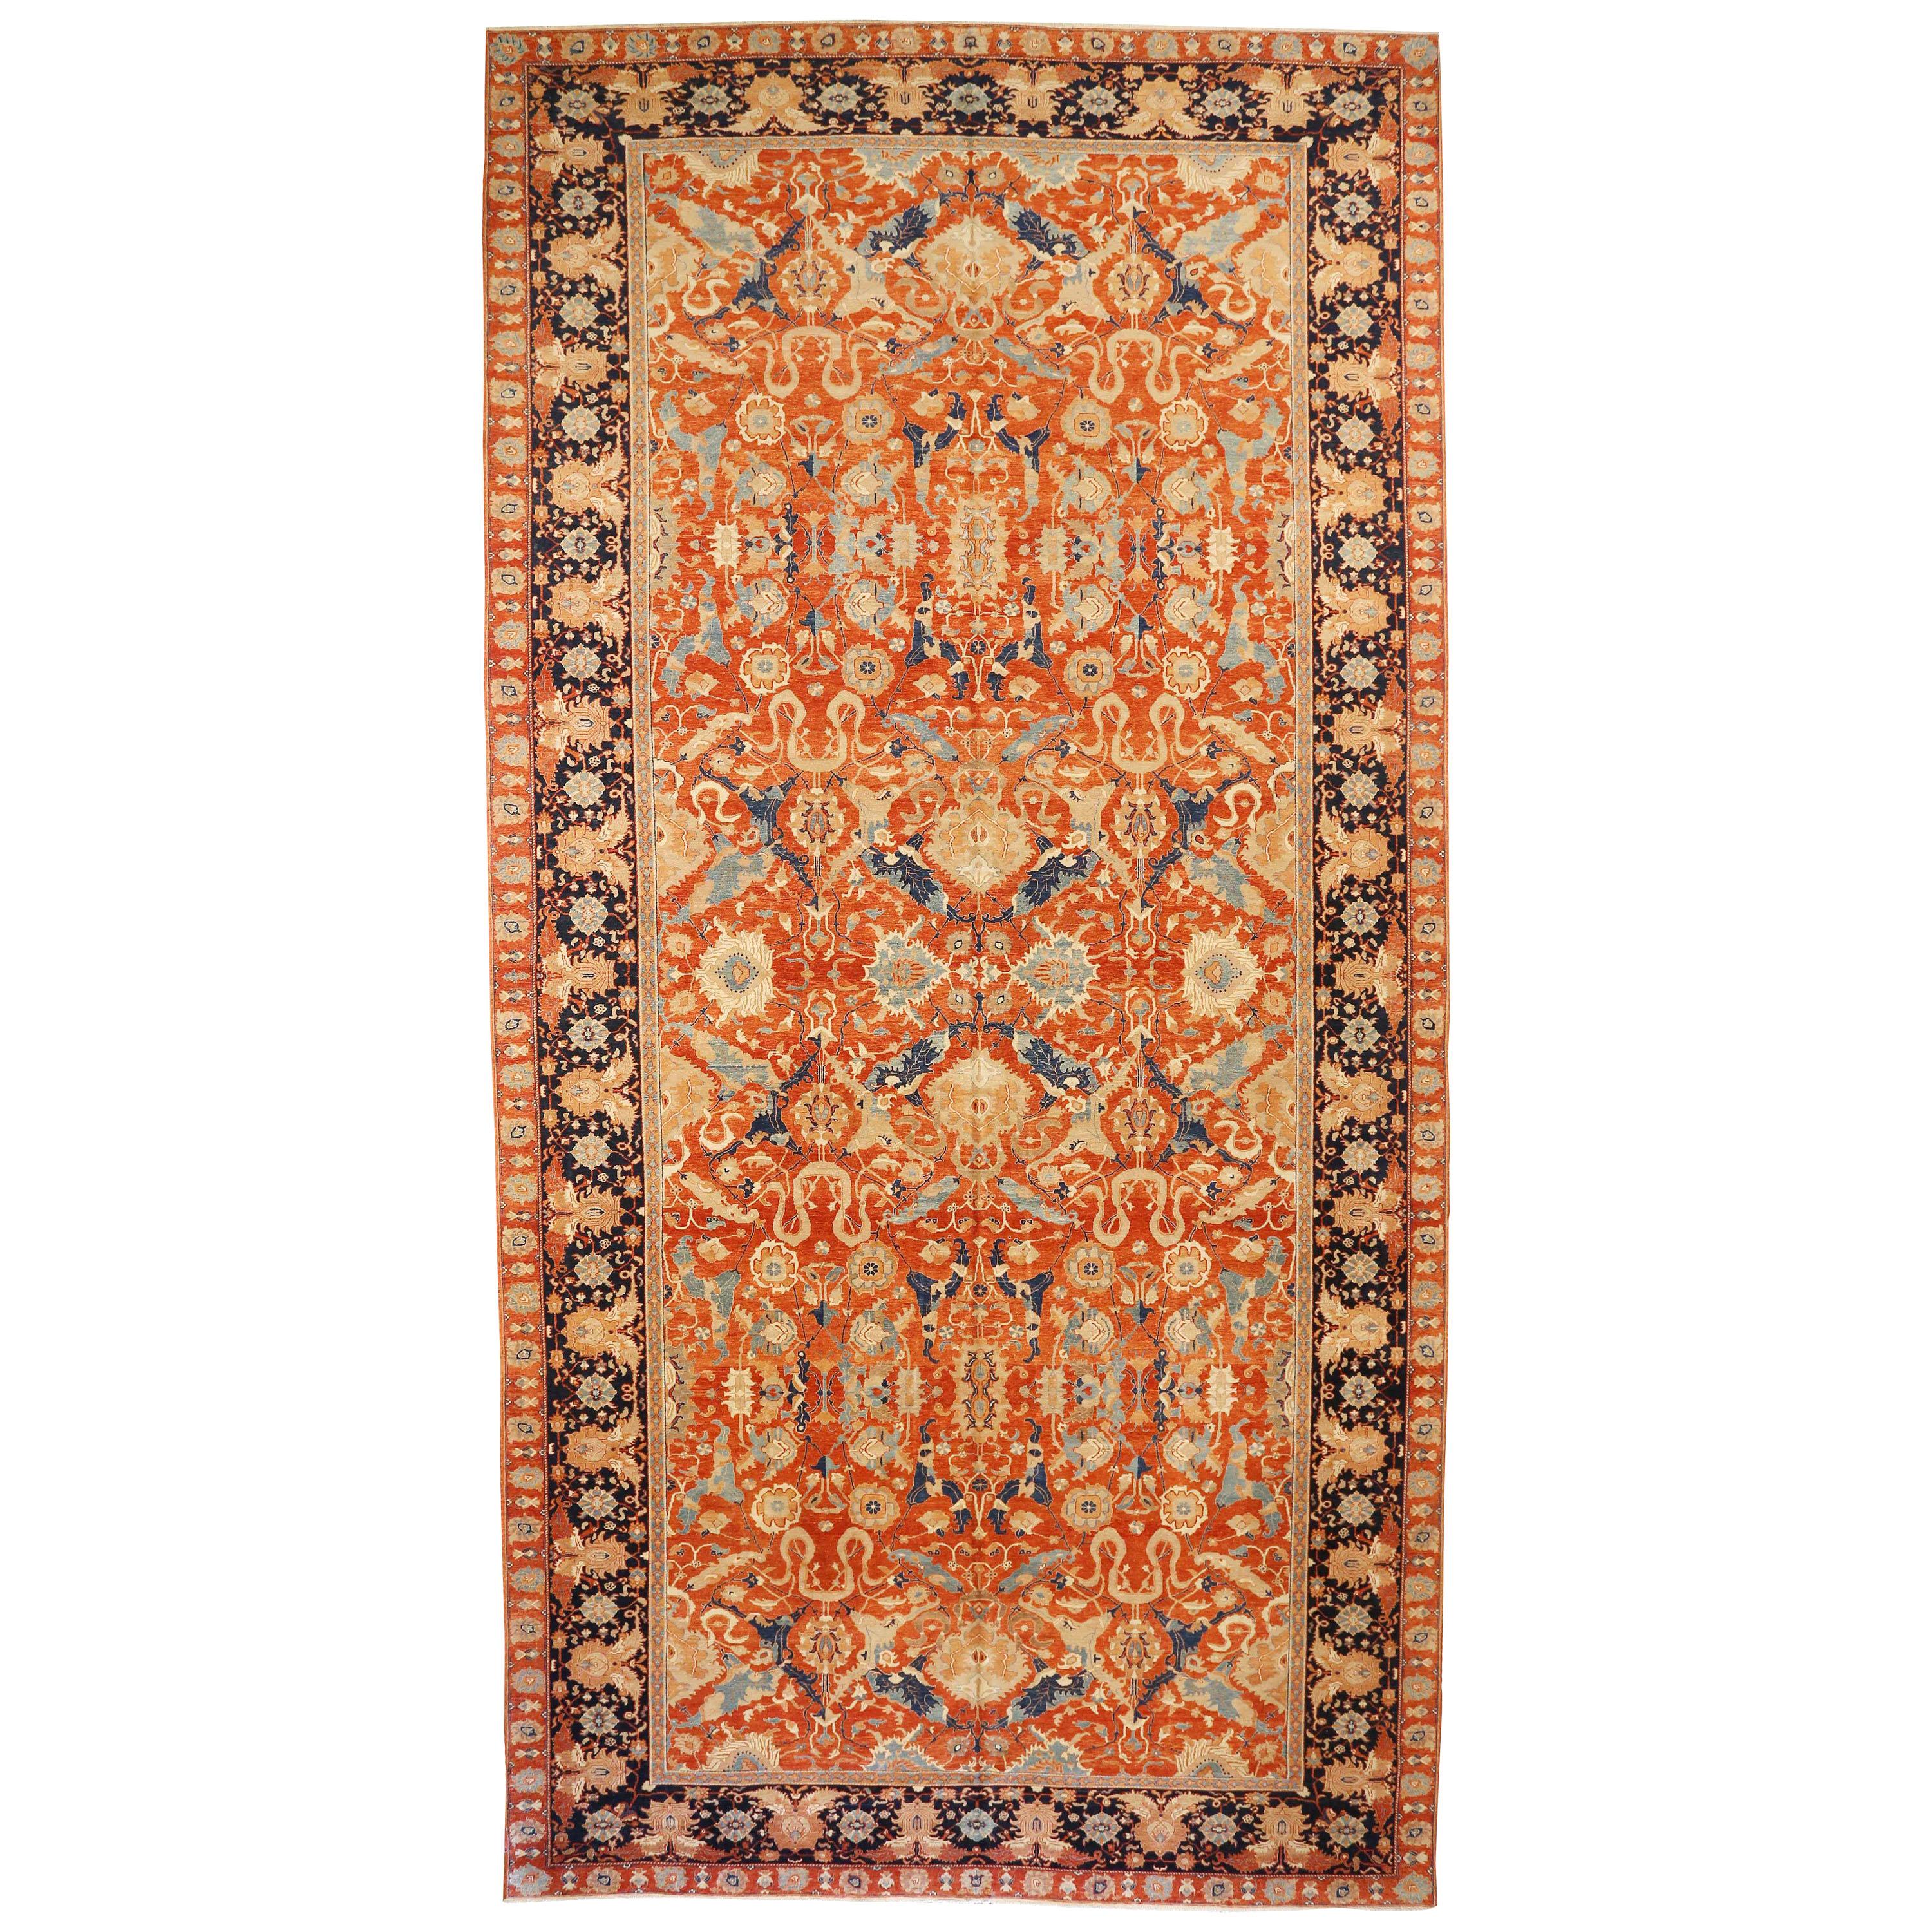 Contemporary Farahan Style Rug with Navy and Gray Floral Details on Orange Field For Sale